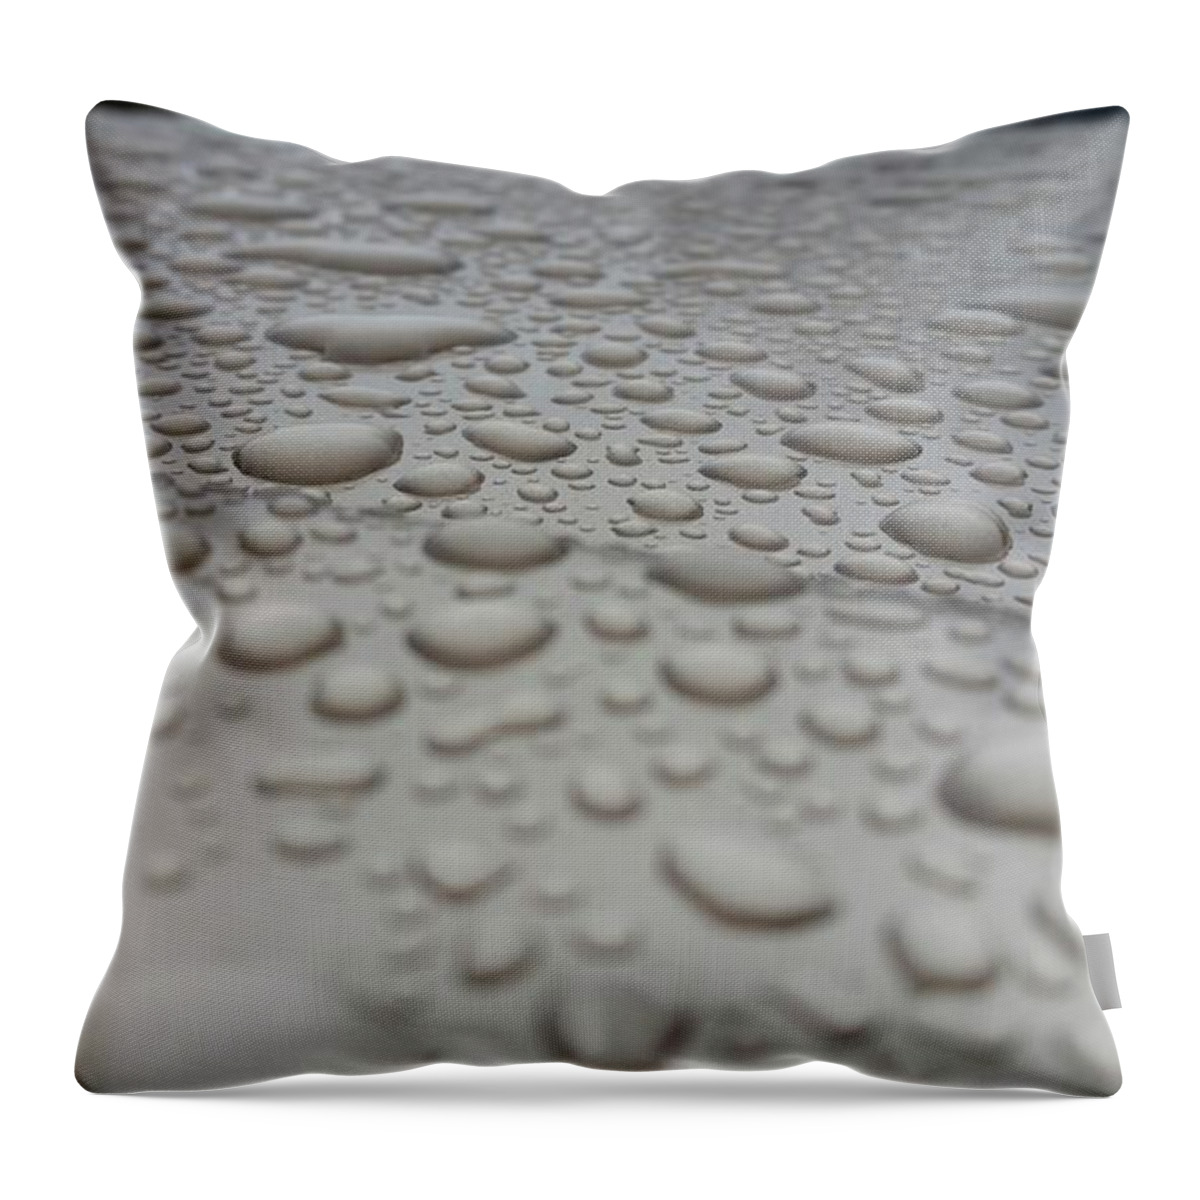  Throw Pillow featuring the photograph Beading by Heather E Harman